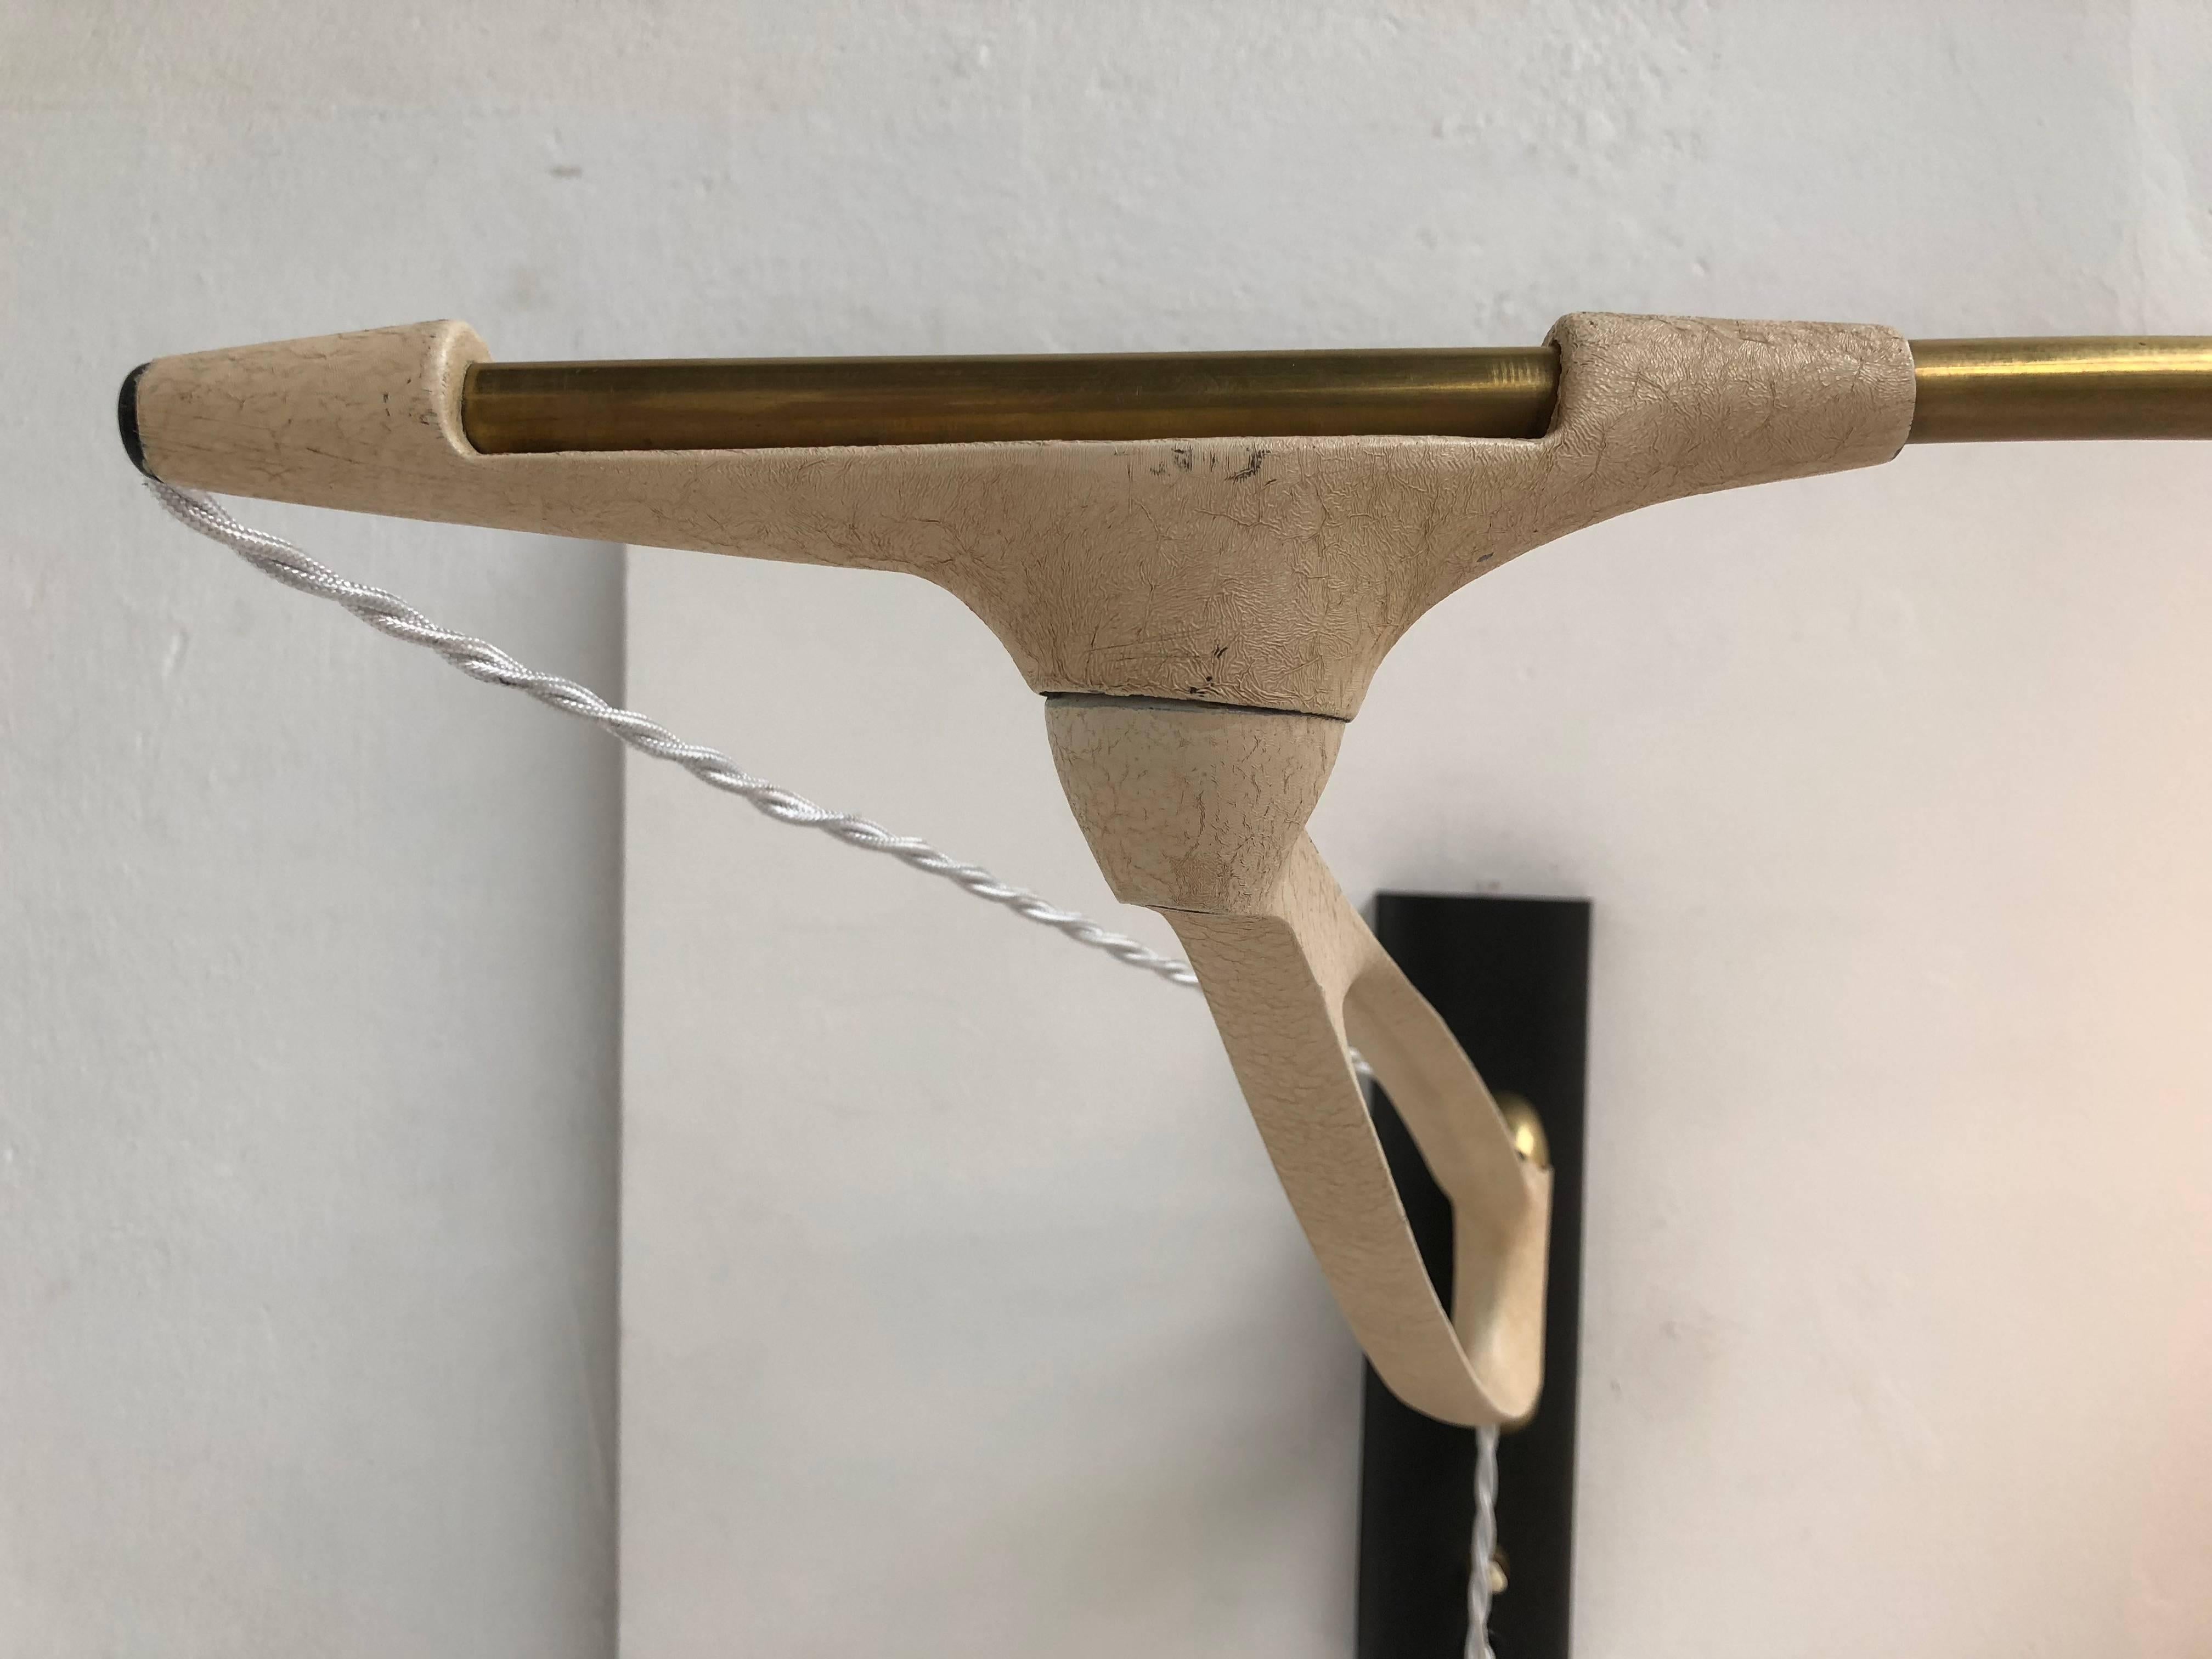 Beautitiful 1950s Swing Arm Counterbalanced Wall Applique by Cosack Leuchten (Emailliert)